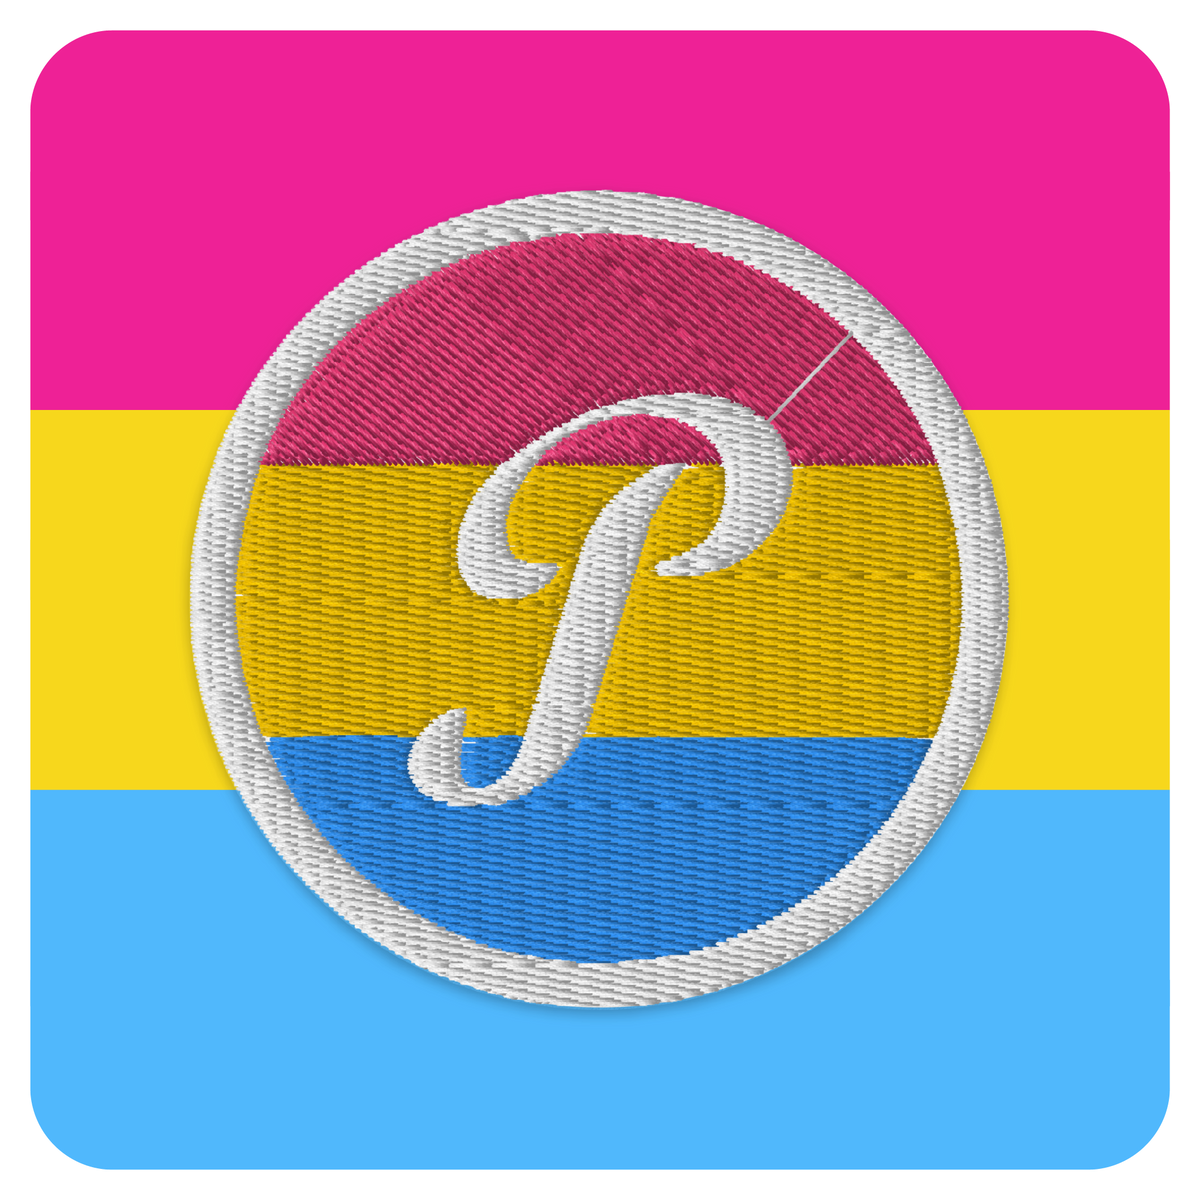 PANSEXUAL PRIDE PATCH